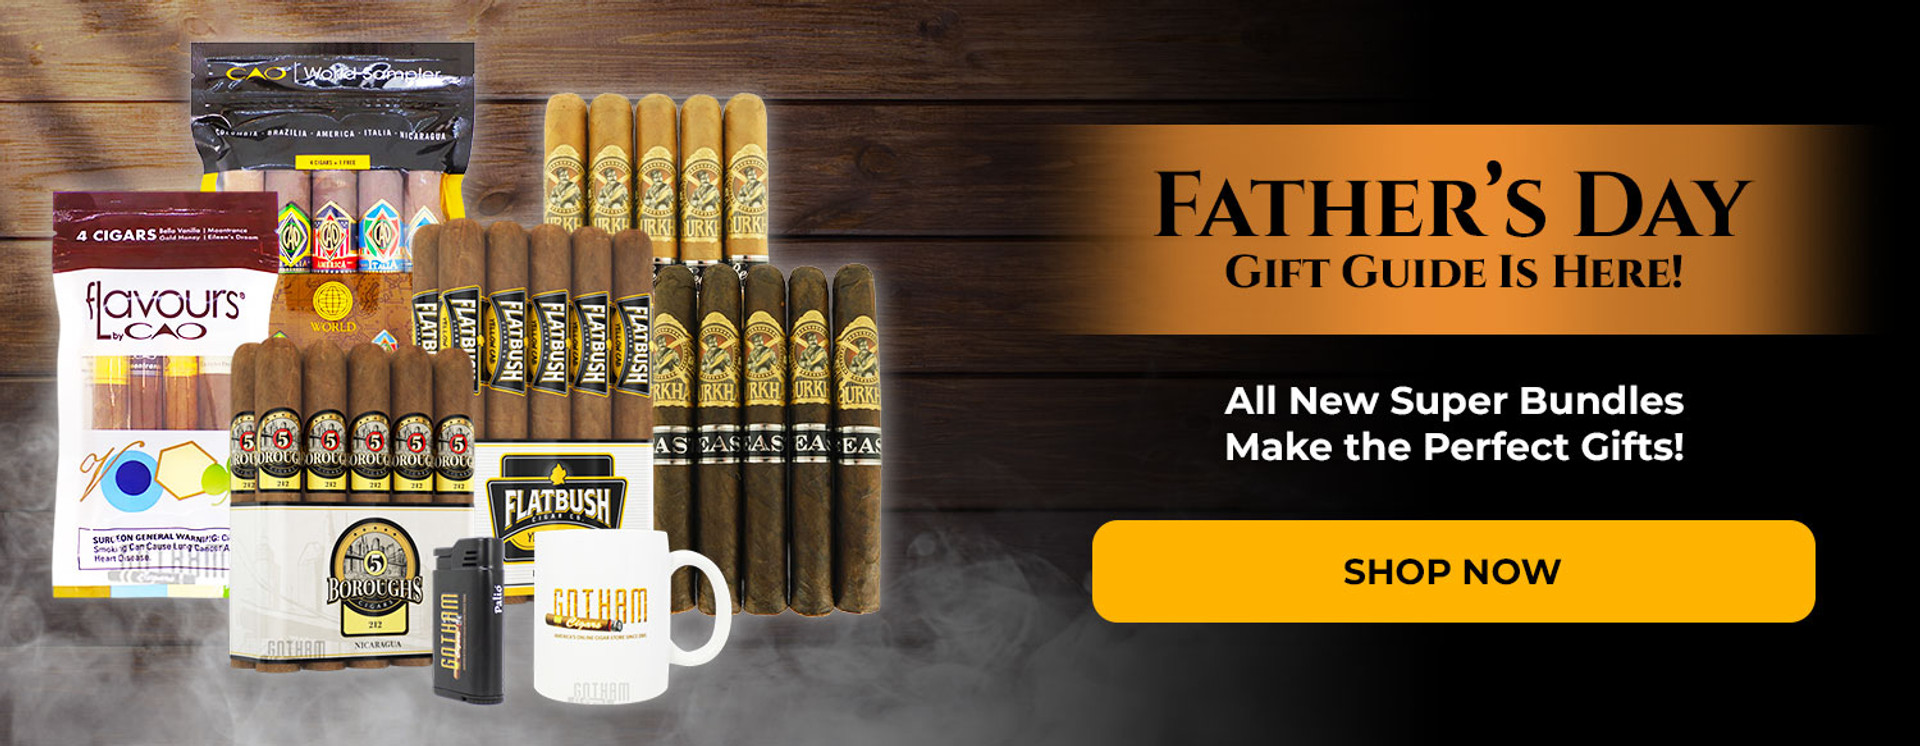 Father's Day Gift Guide. Super Bundles